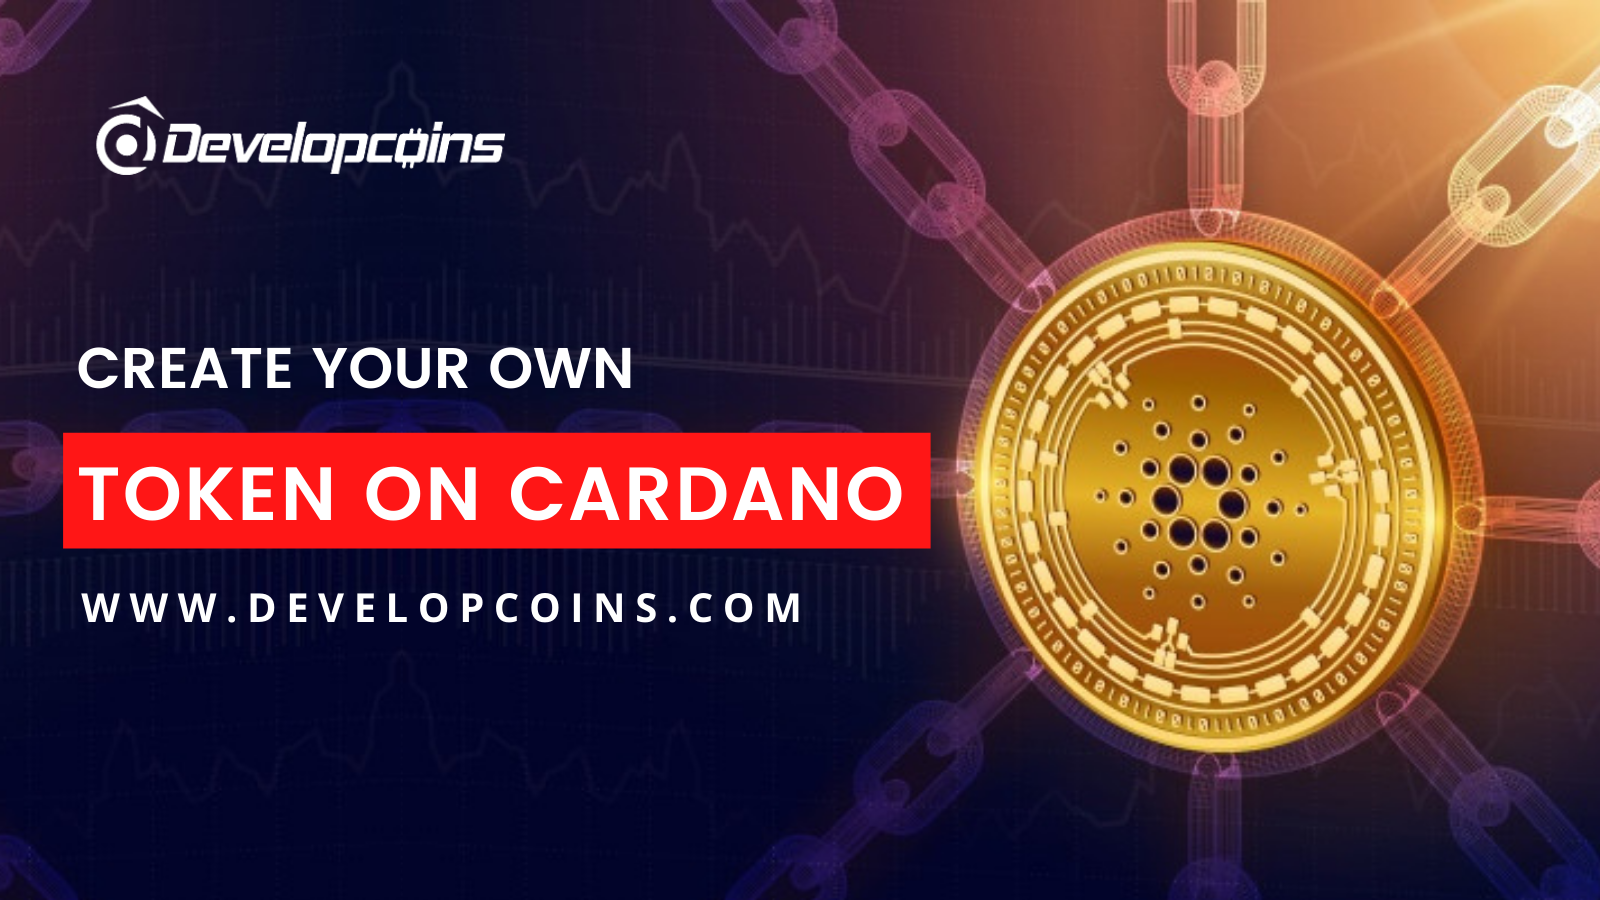 How to Create Your Own Token on Cardano Blockchain?